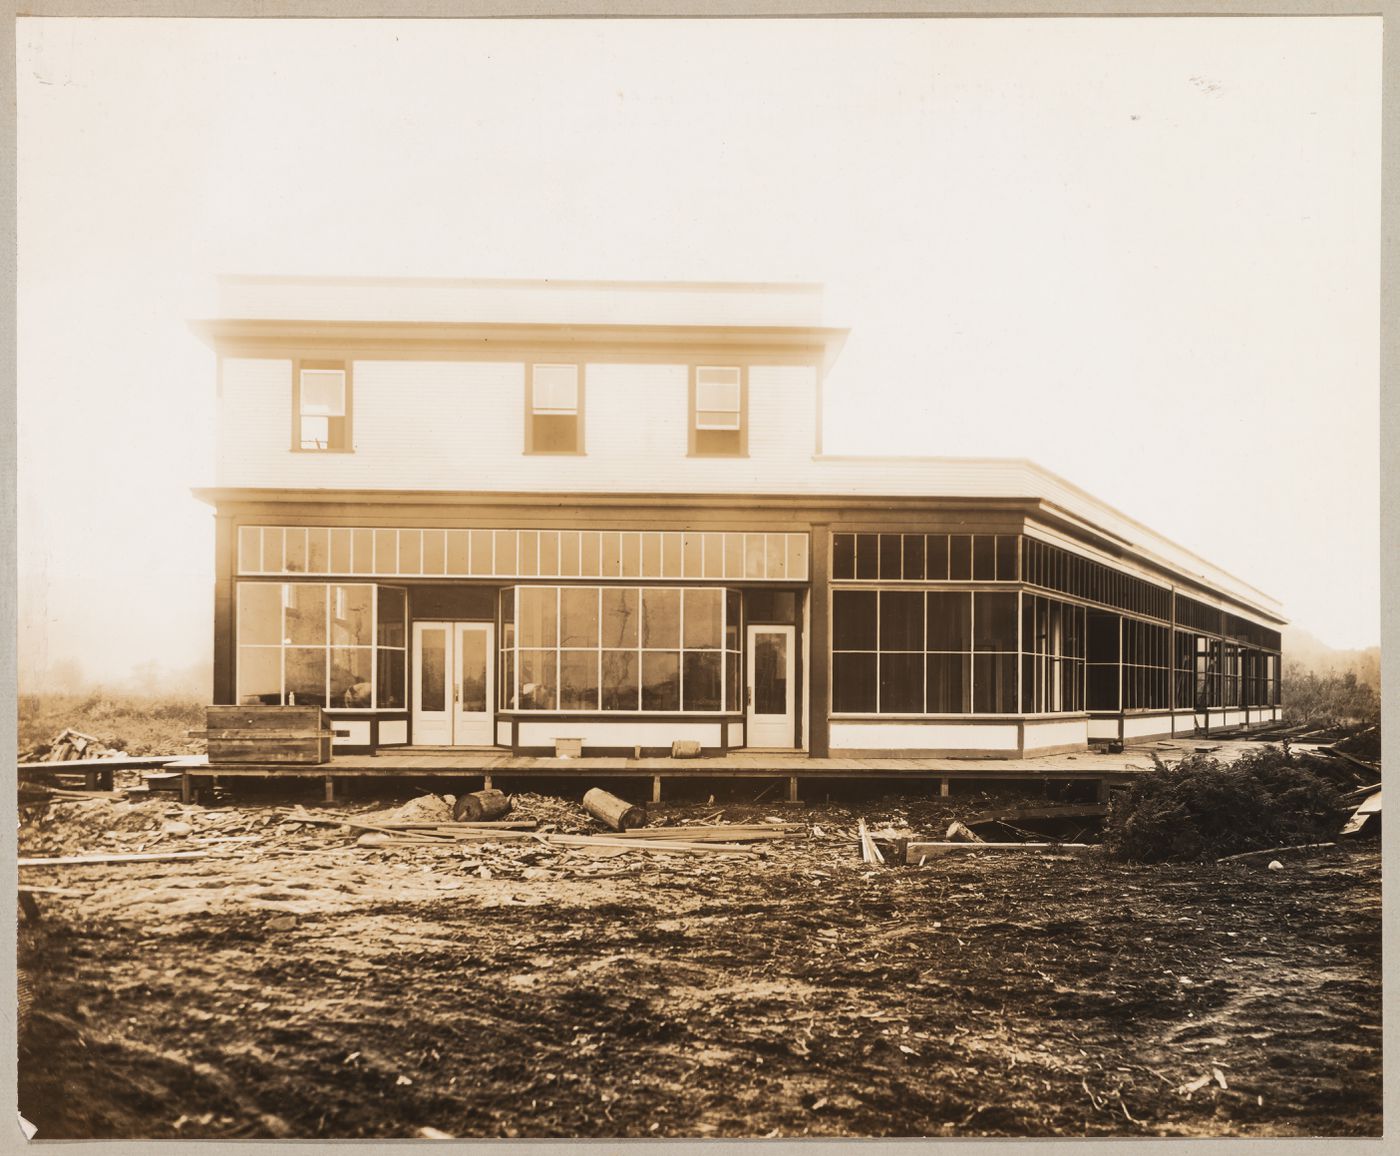 View of a commercial building under construction, corner of Broadway and Kingsway, Coquitlam (now Port Coquitlam), British Columbia